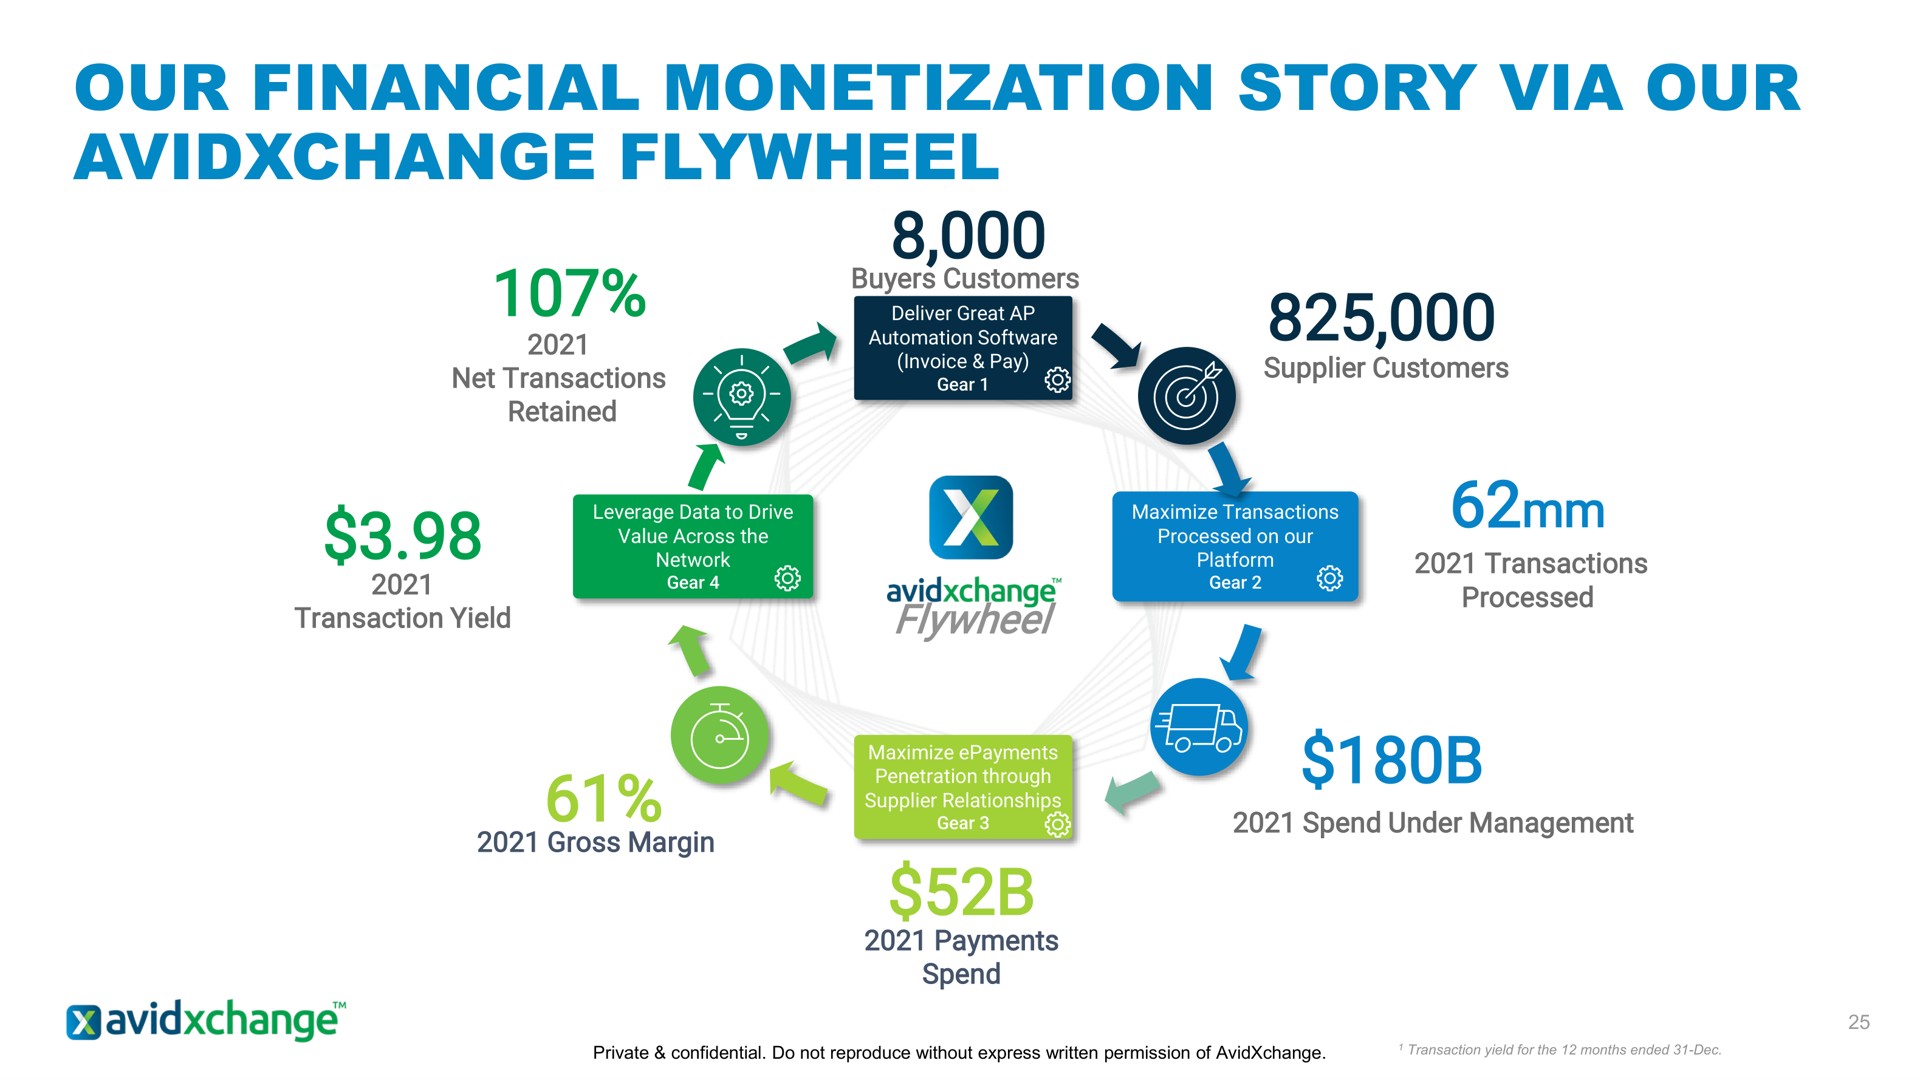 our financial monetization story via our flywheel son | AvidXchange